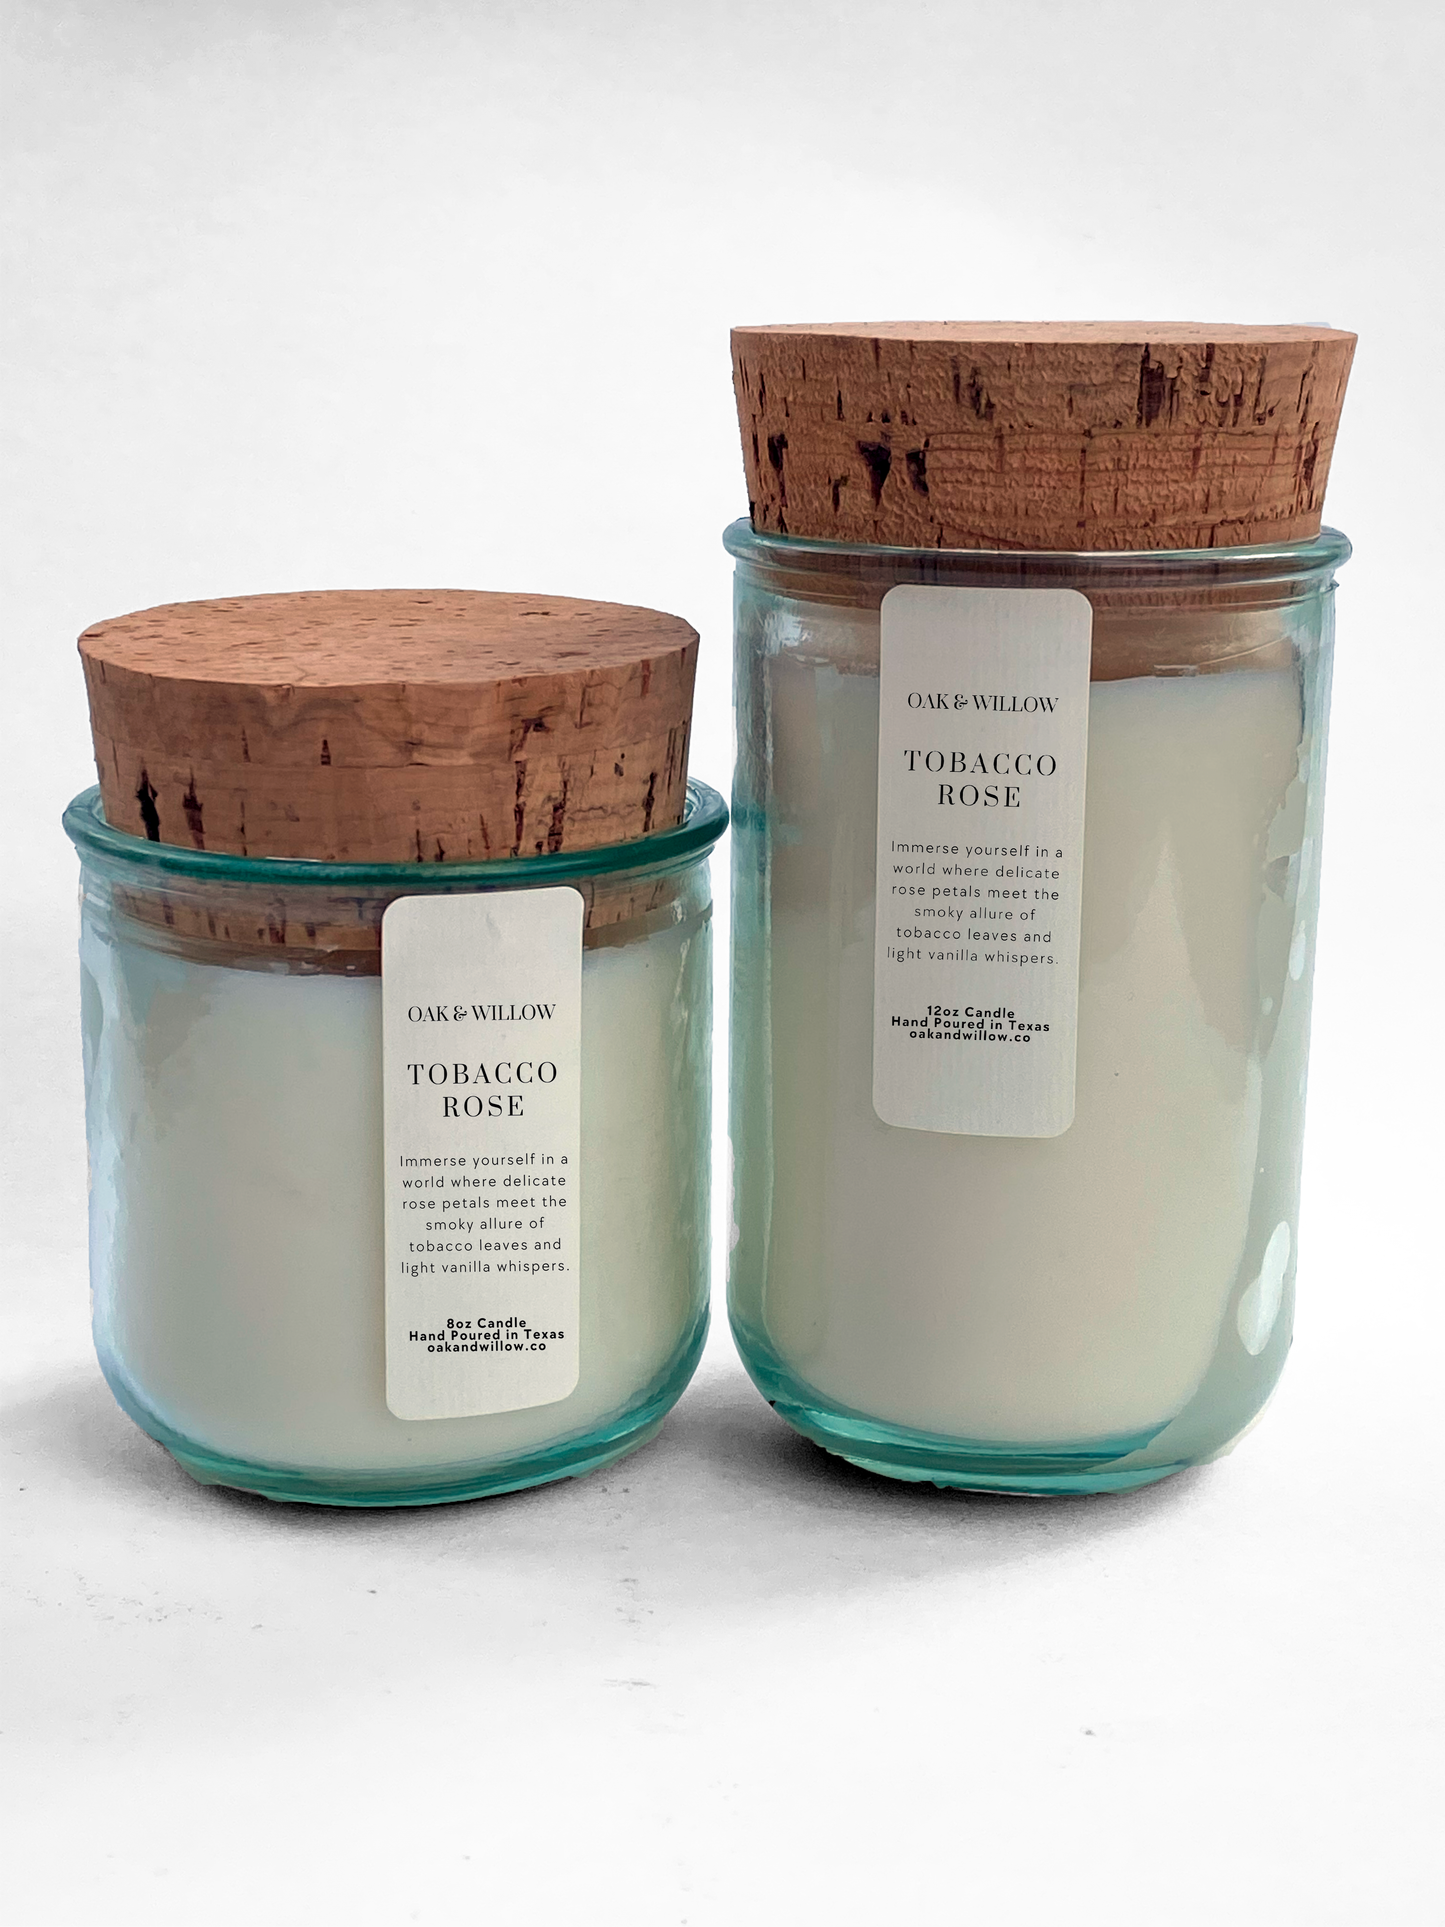 Tobacco Rose Recycled Glass Candle Farmhouse Collection - Rose petals, Tobacco Leaves, and Vanilla